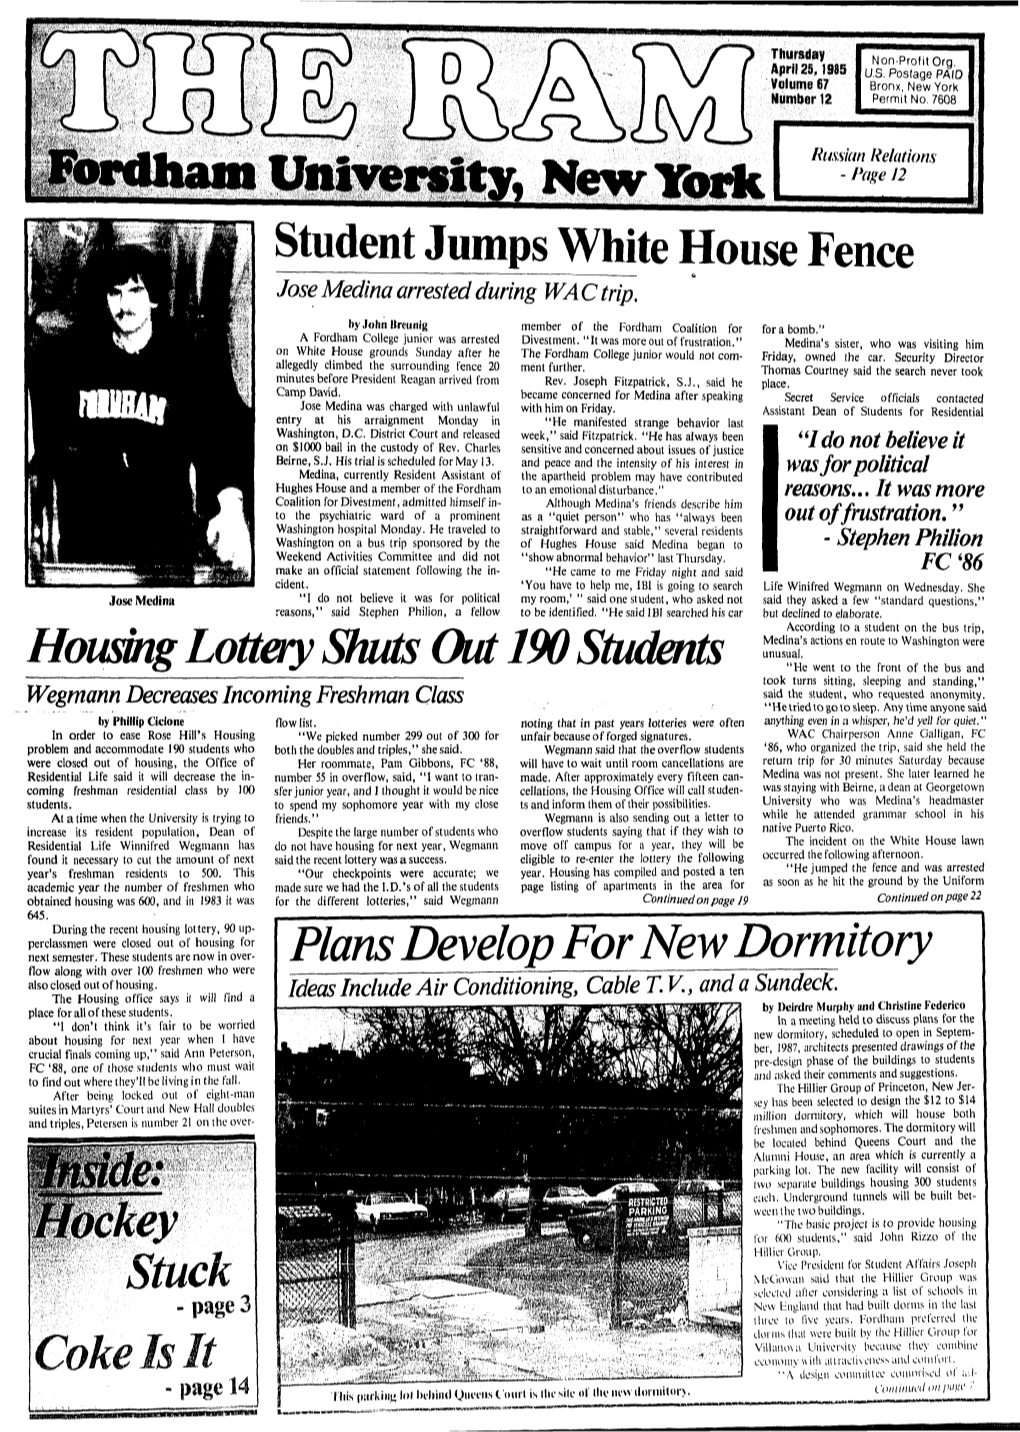 Ewyork - Page 12 Student Jumps White House Fence Jose Medina Arrested During WAC Trip